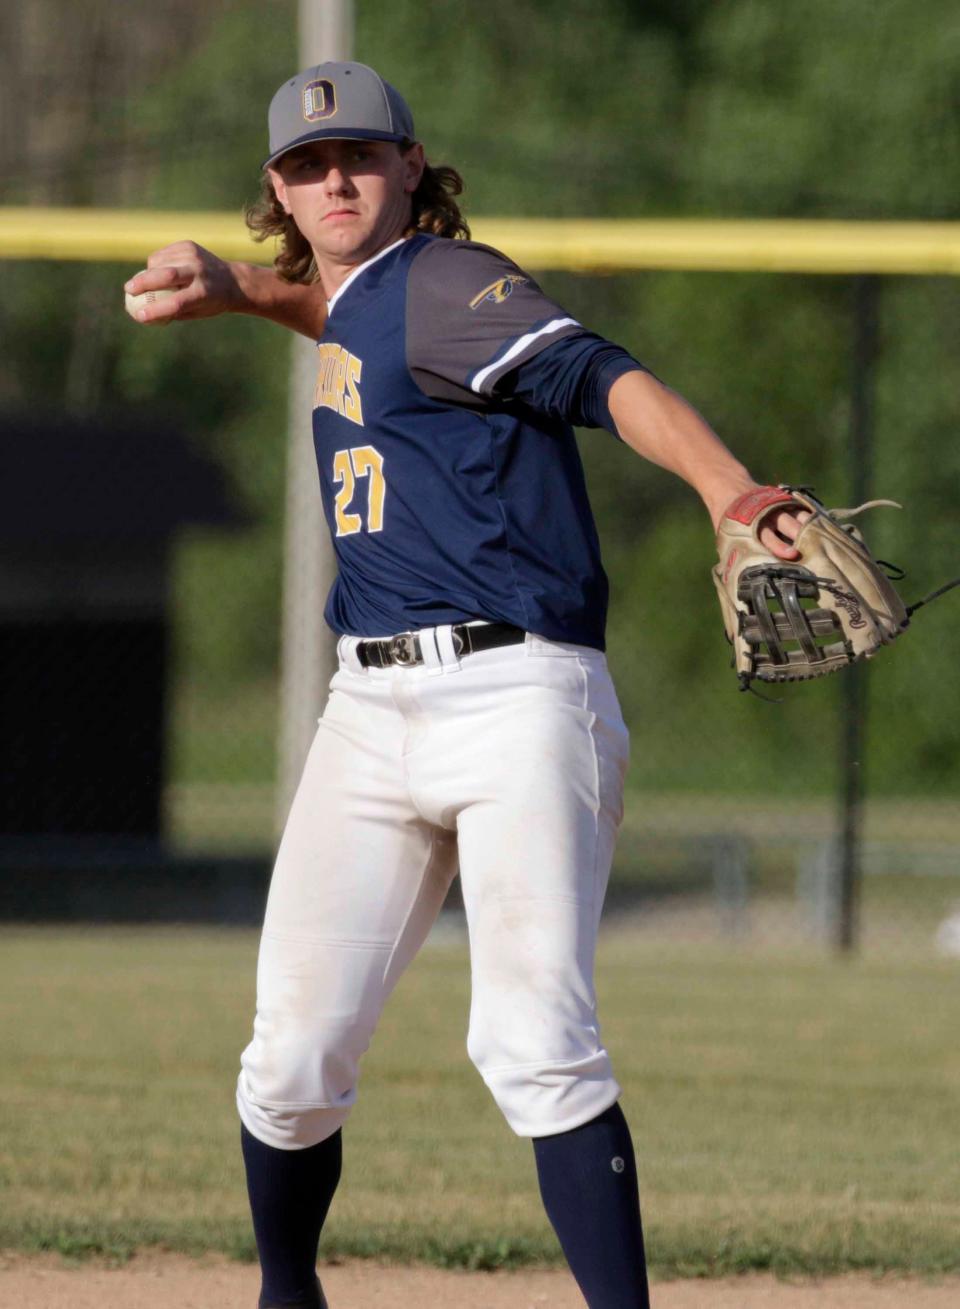 Owen's younger brother Noah Miller was even more highly-regarded coming out of high school at Ozaukee. He was taken with the 36th overall pick in the 2021 draft by the Twins.